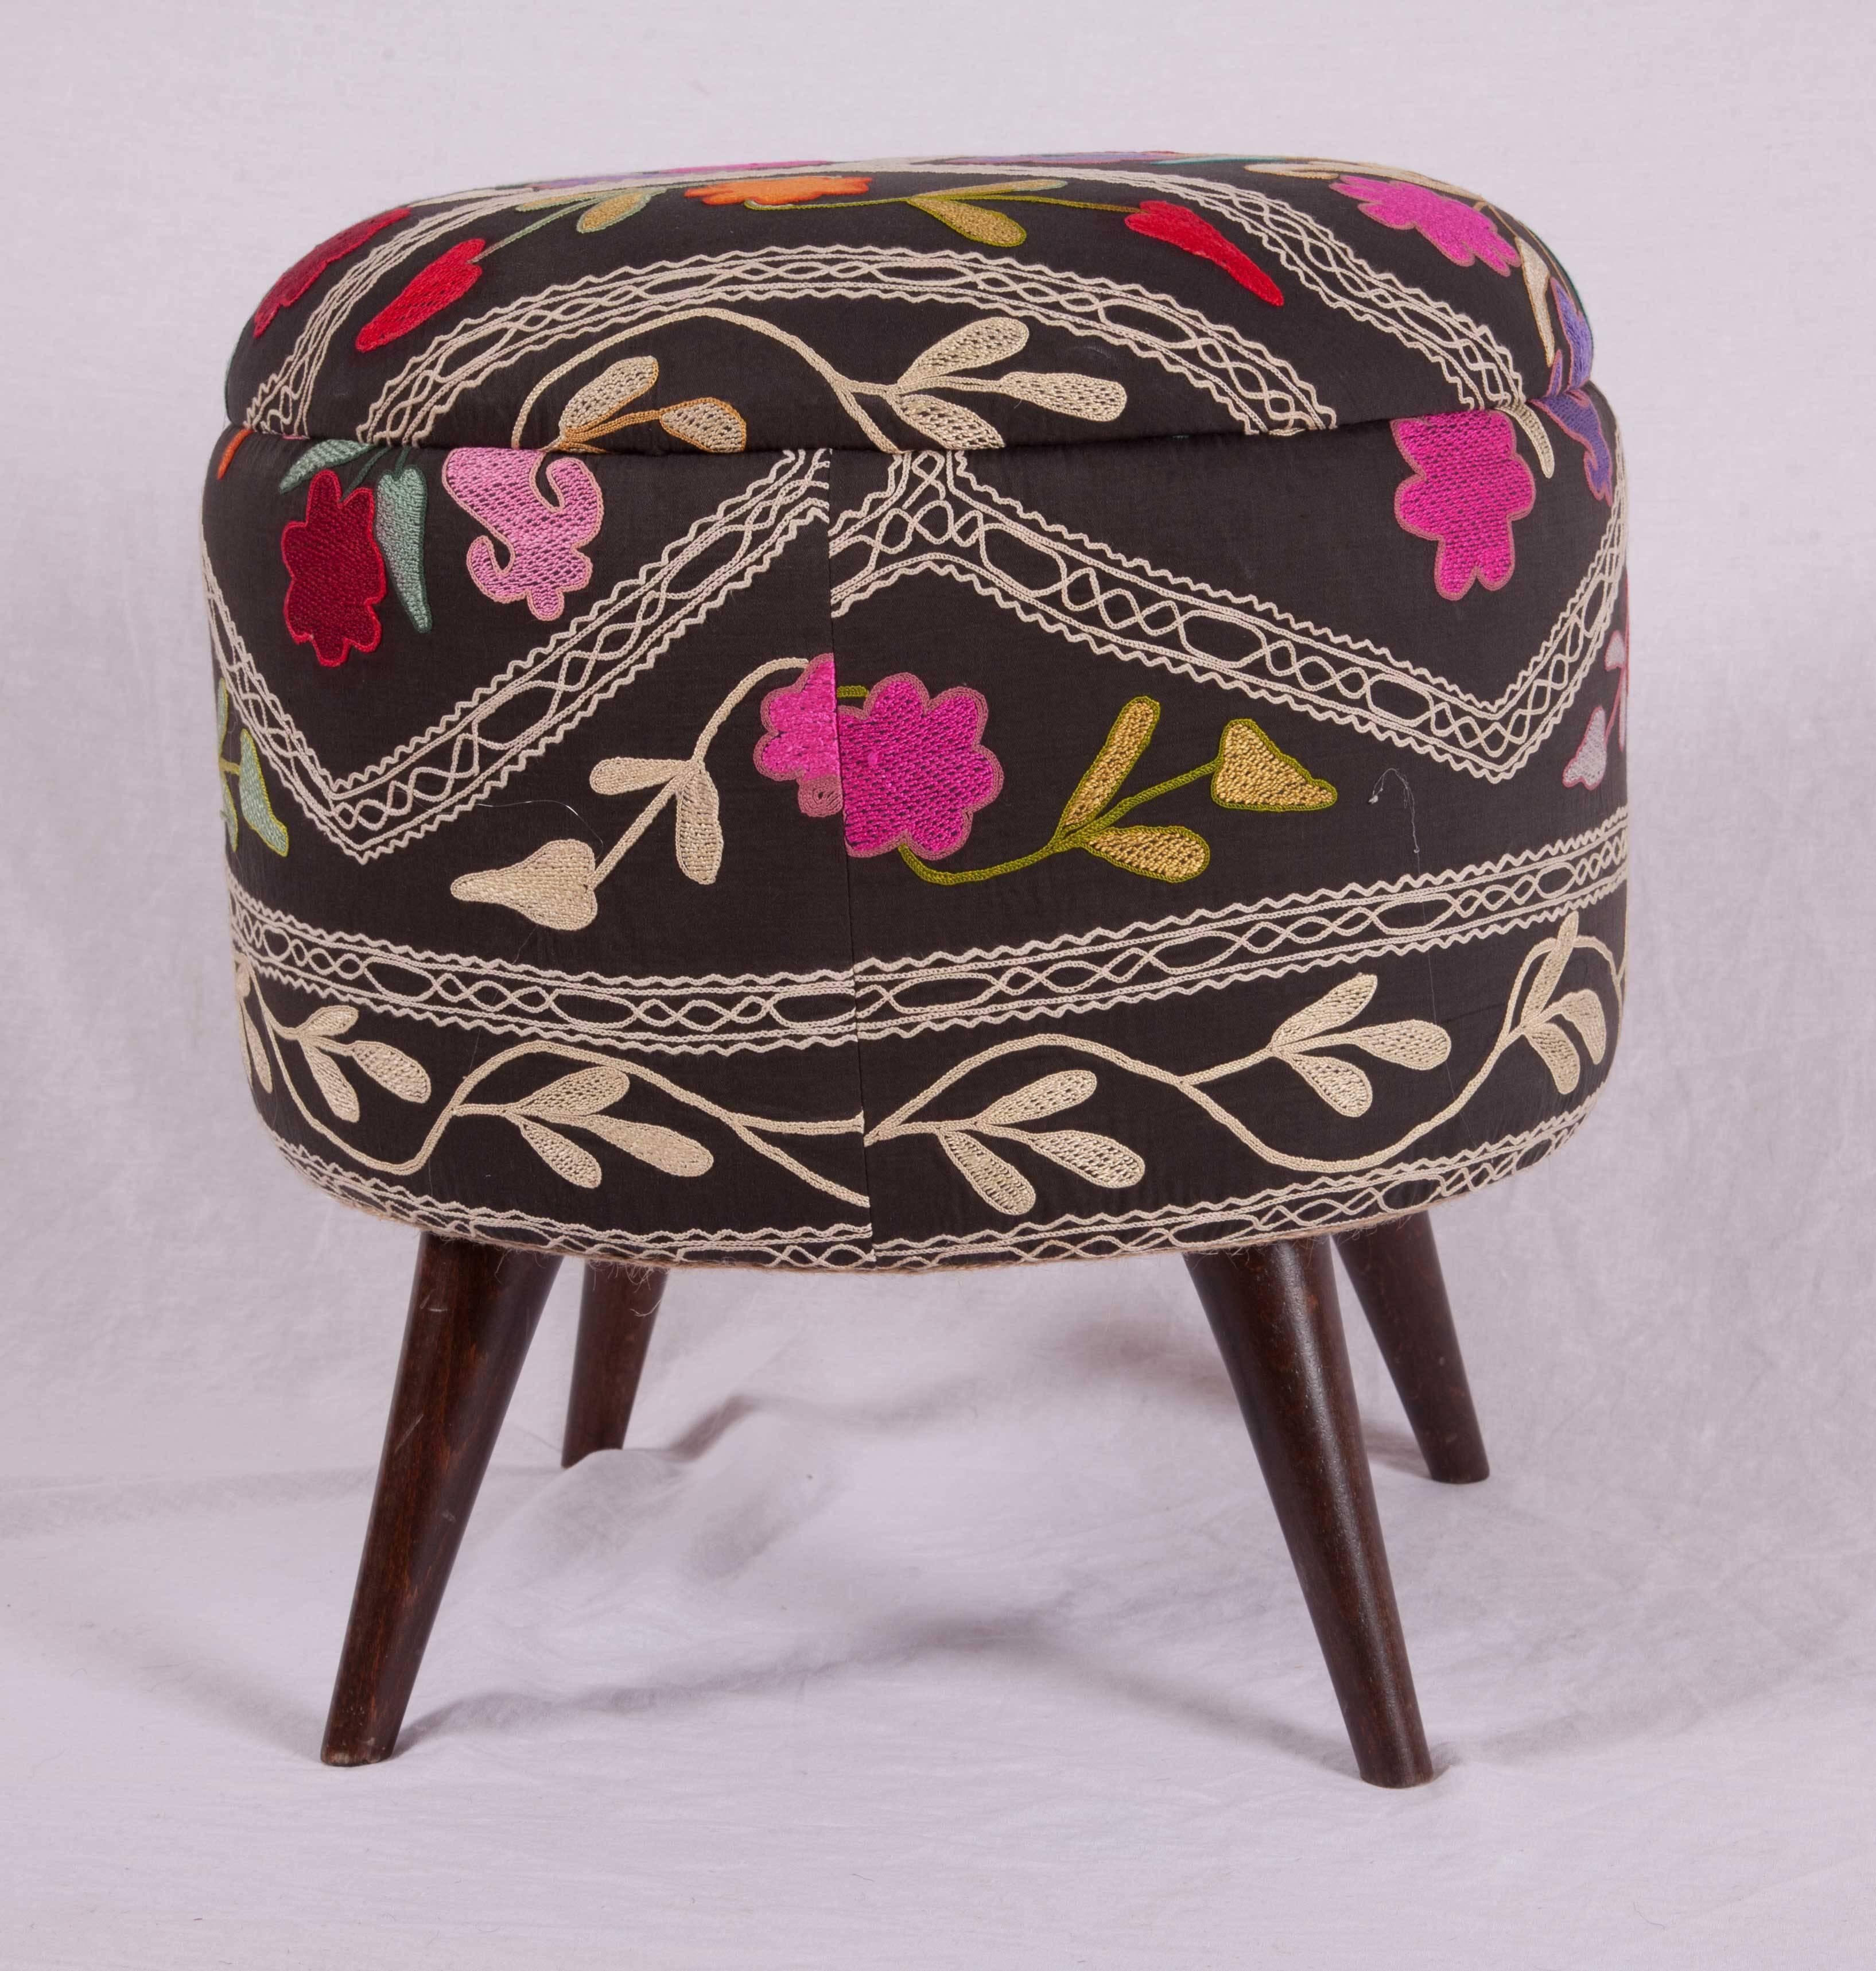 Contemporary Ottoman or Poufs Fashioned from a Mid-20th Century Samarkand Silk Suzani